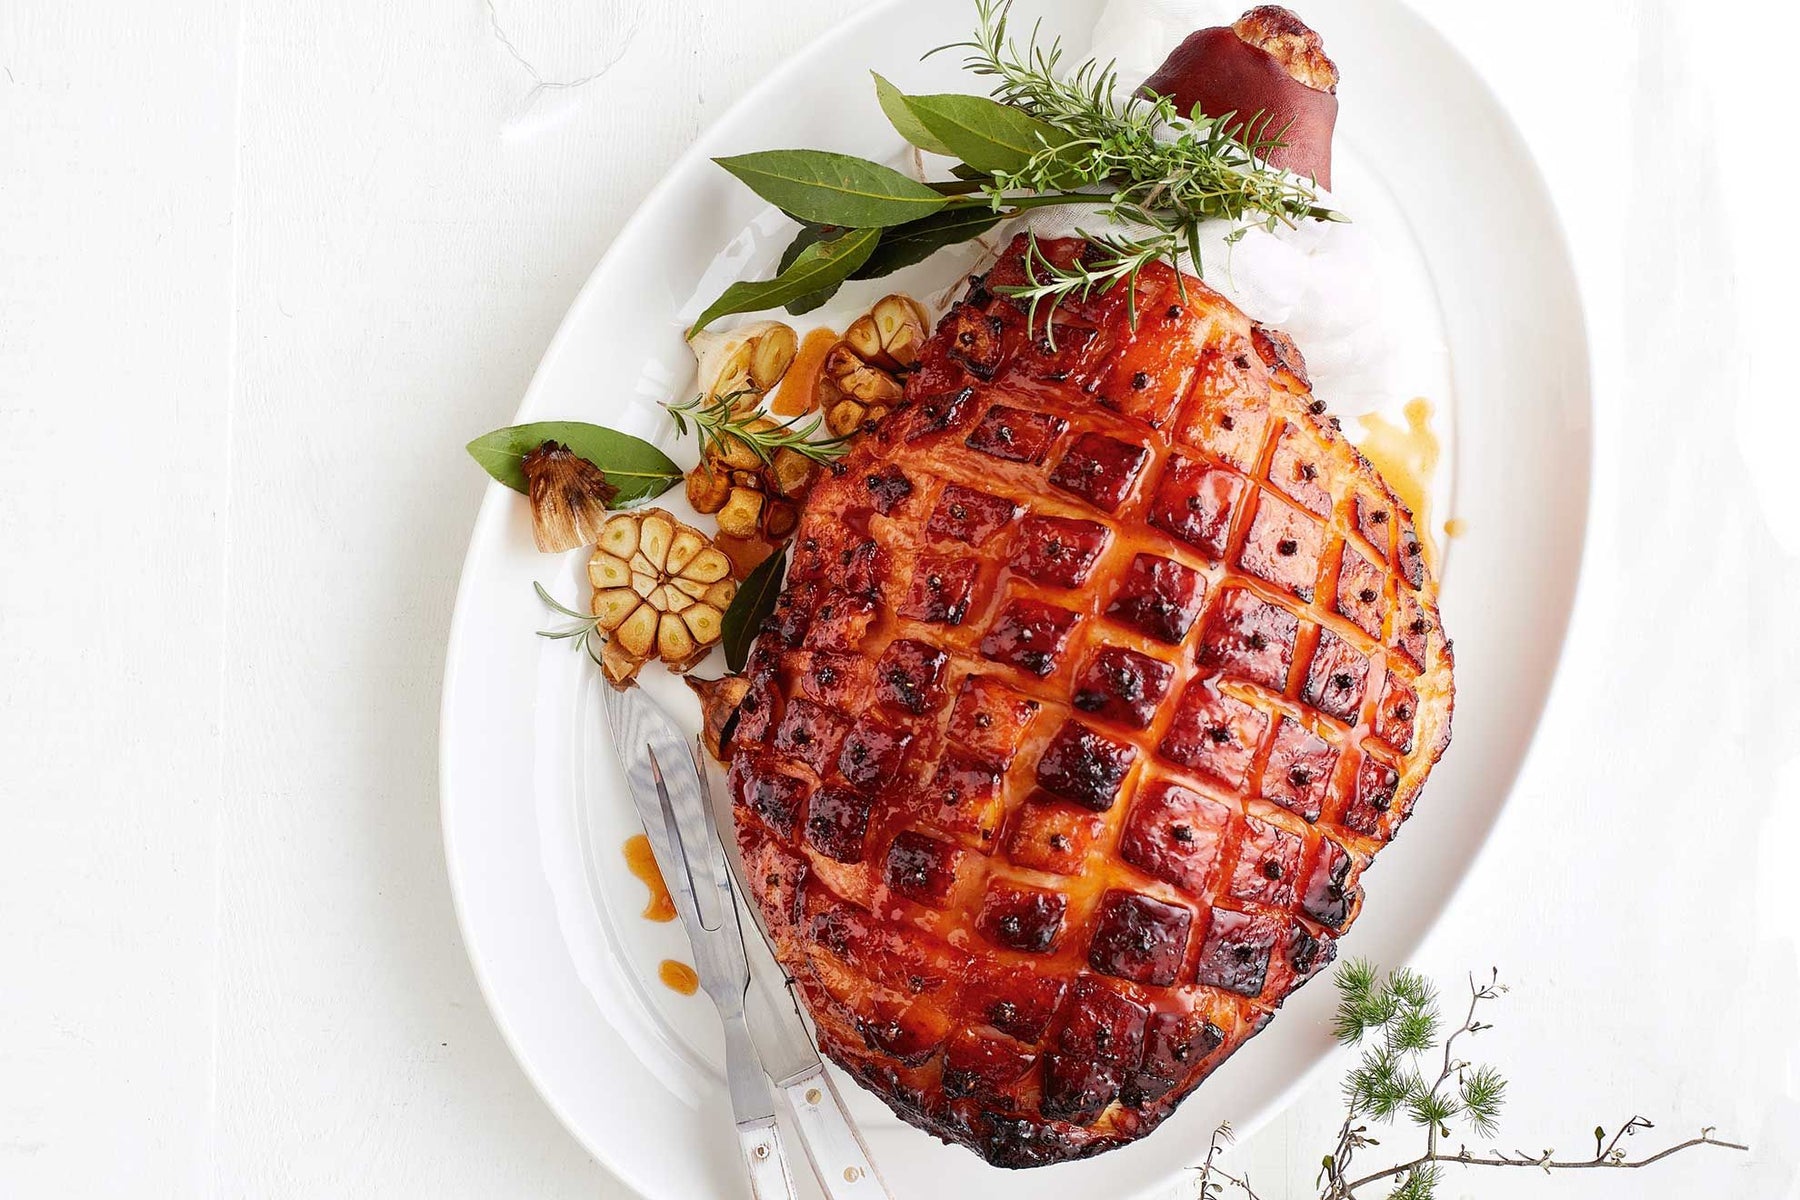 D&C Monthly Recipe - Sweet and Sticky Apricot Glazed Ham